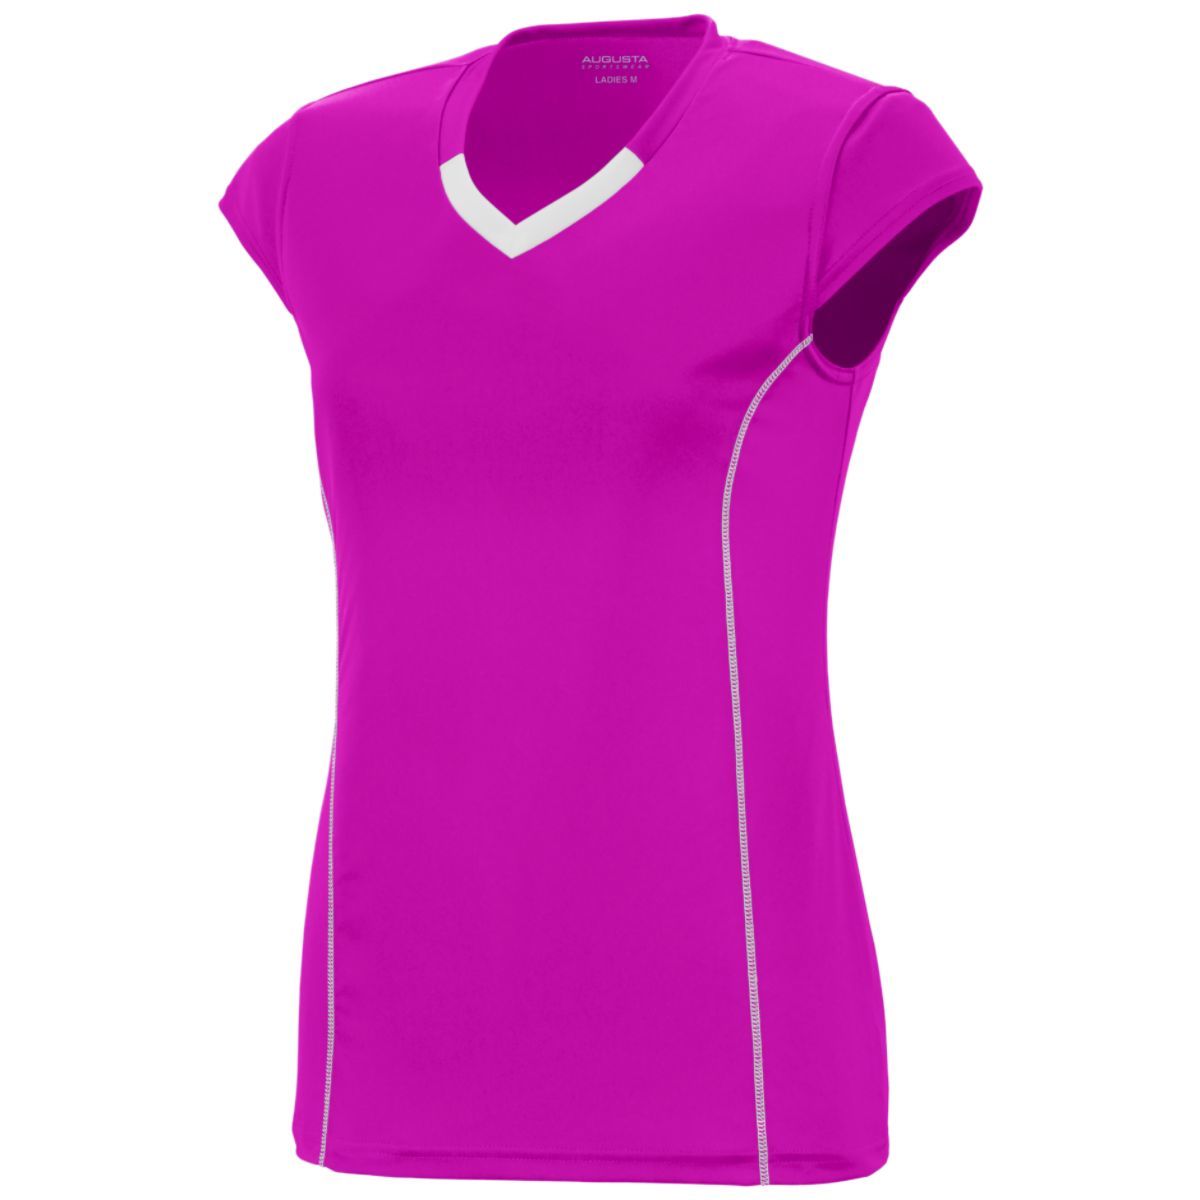 Augusta Sportswear Girls Blash Jersey in Power Pink/White  -Part of the Girls, Augusta-Products, Volleyball, Girls-Jersey, Shirts product lines at KanaleyCreations.com